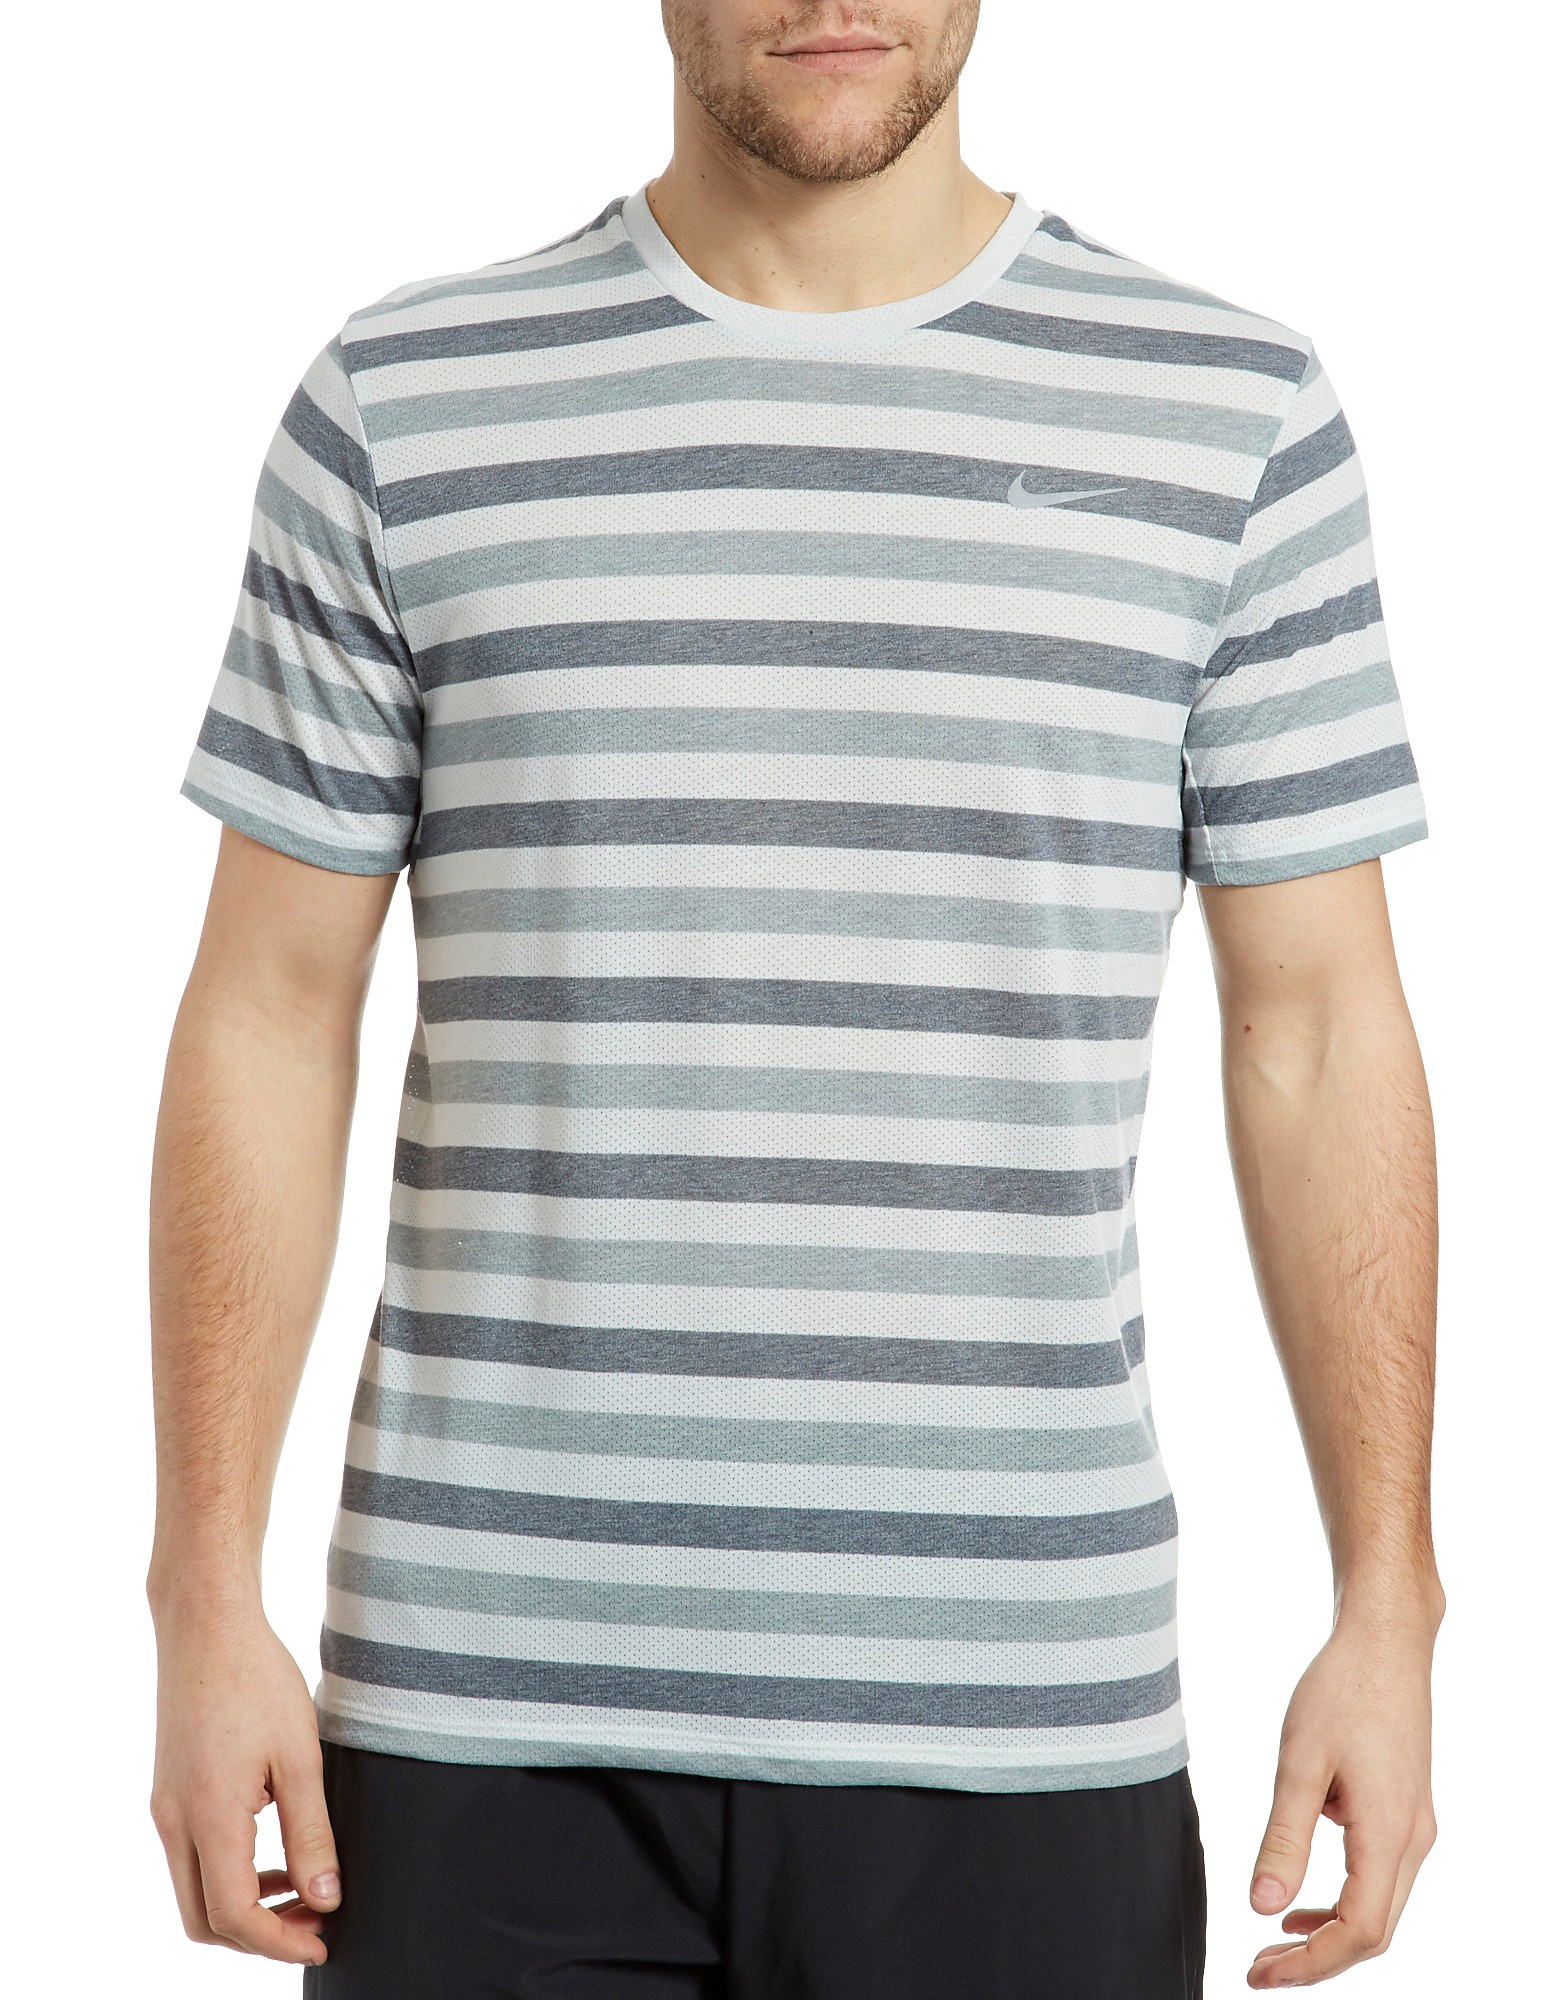 Nike Dry Fit Tailwind T-Shirt